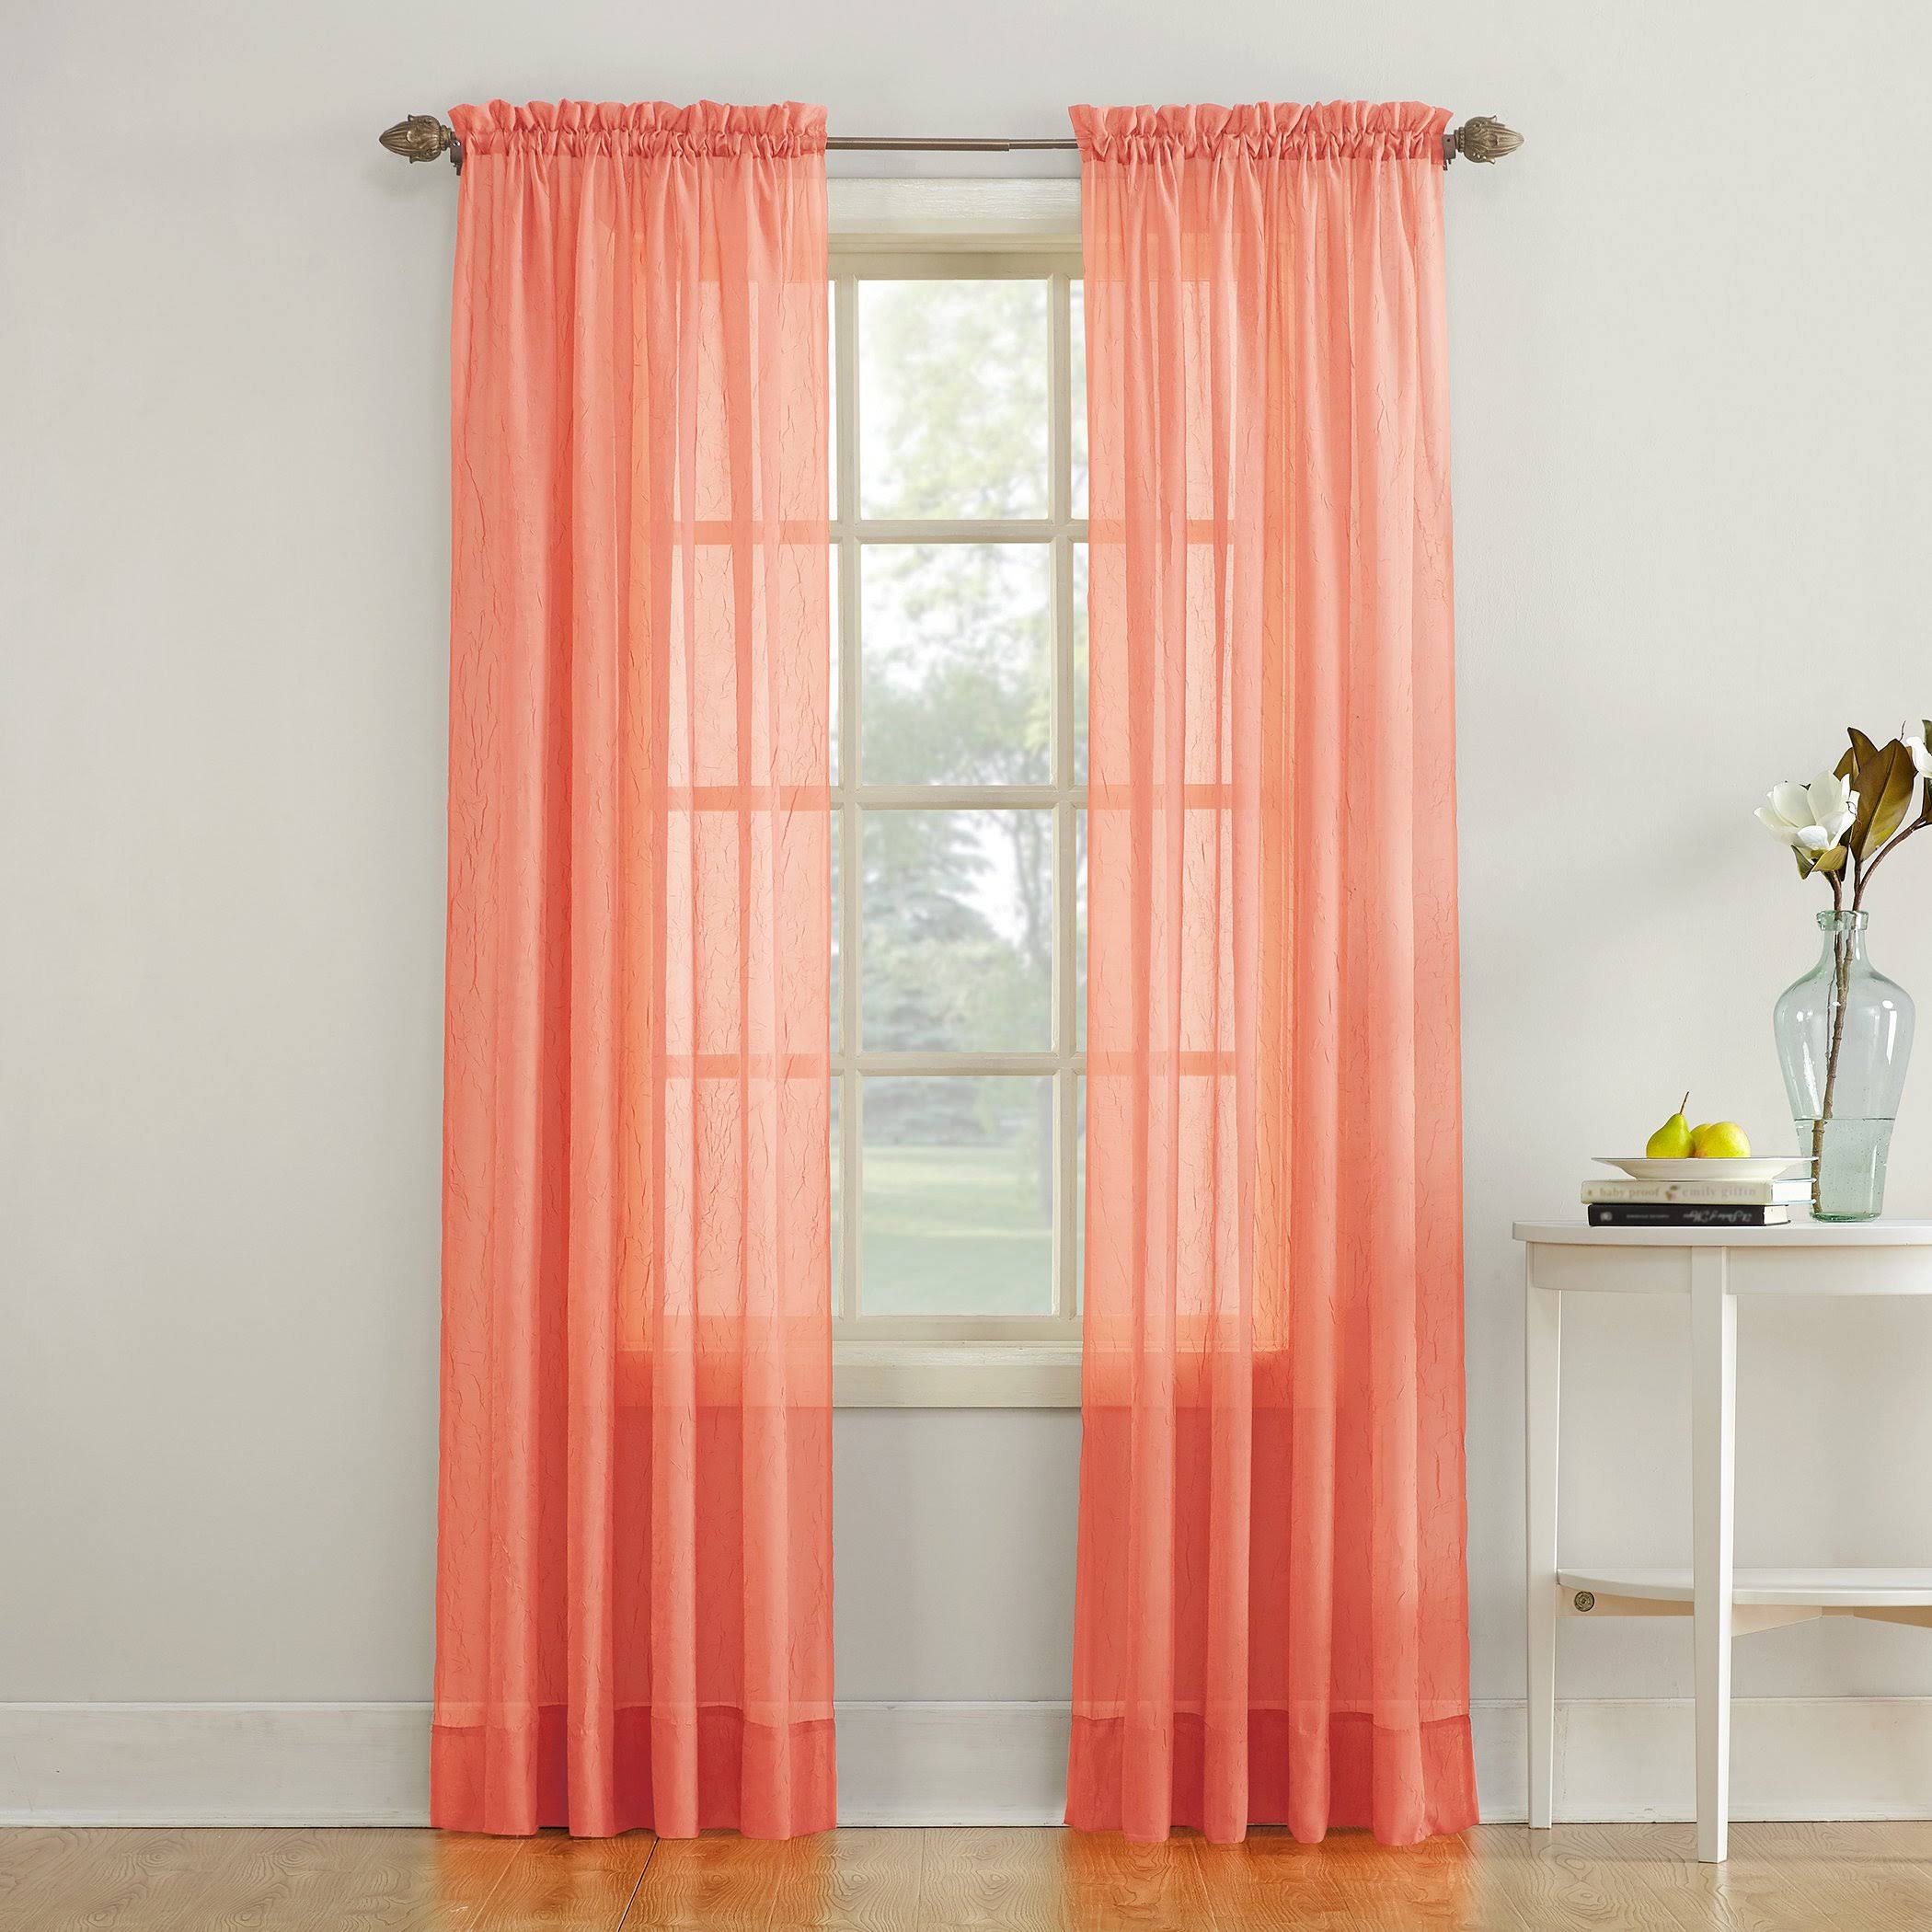 No. 918 Erica Sheer Crushed Voile Single Curtain Panel